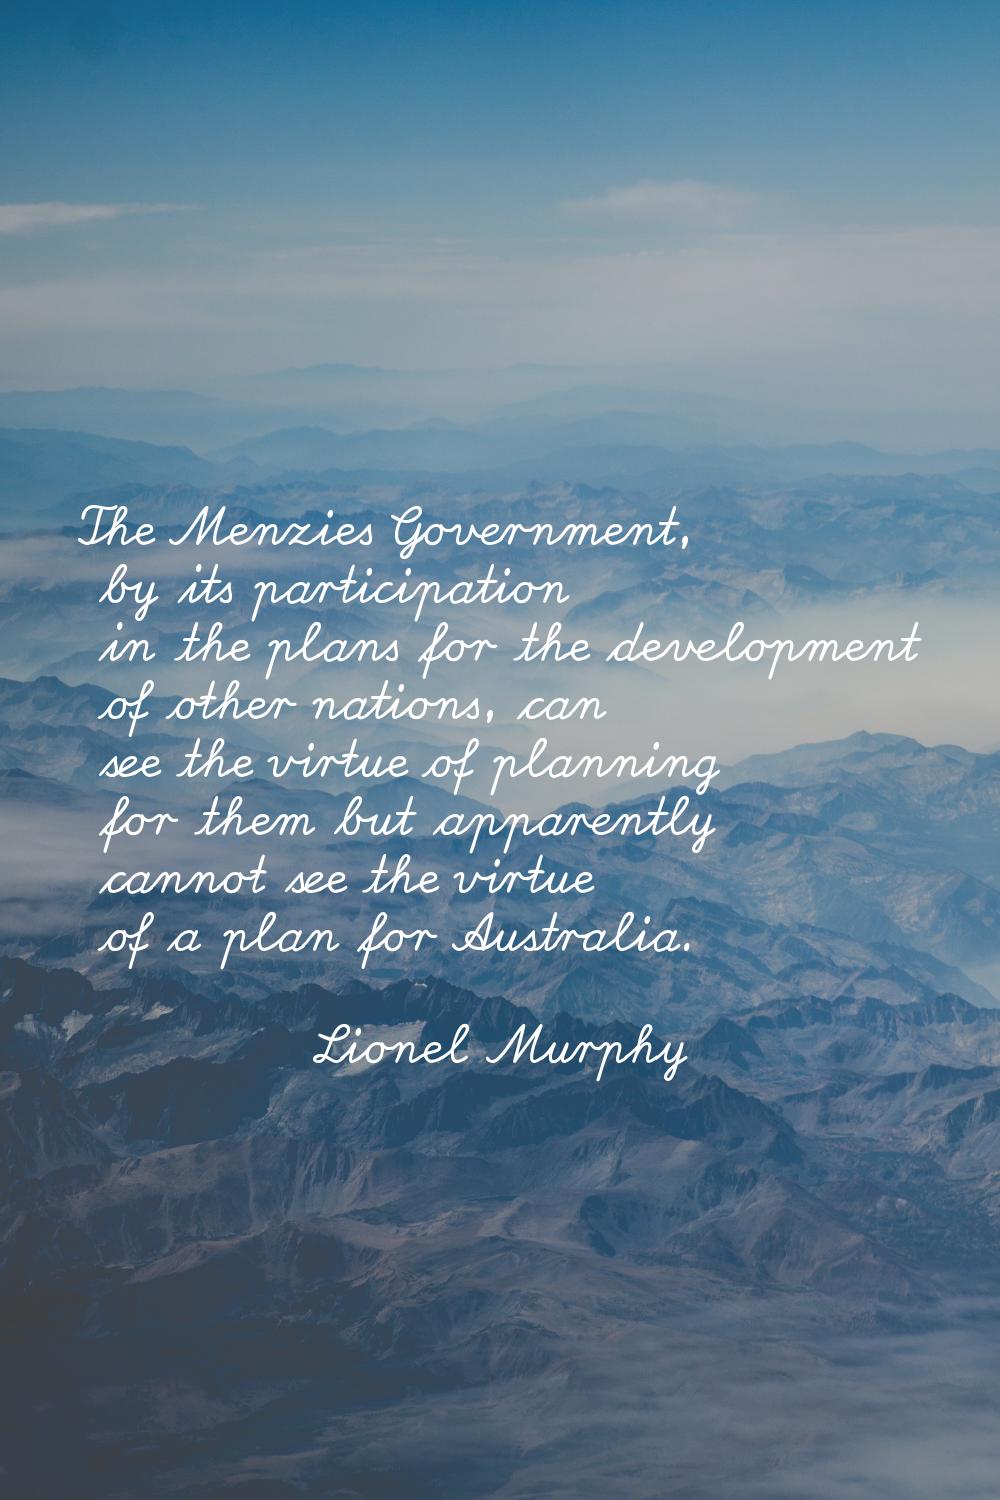 The Menzies Government, by its participation in the plans for the development of other nations, can